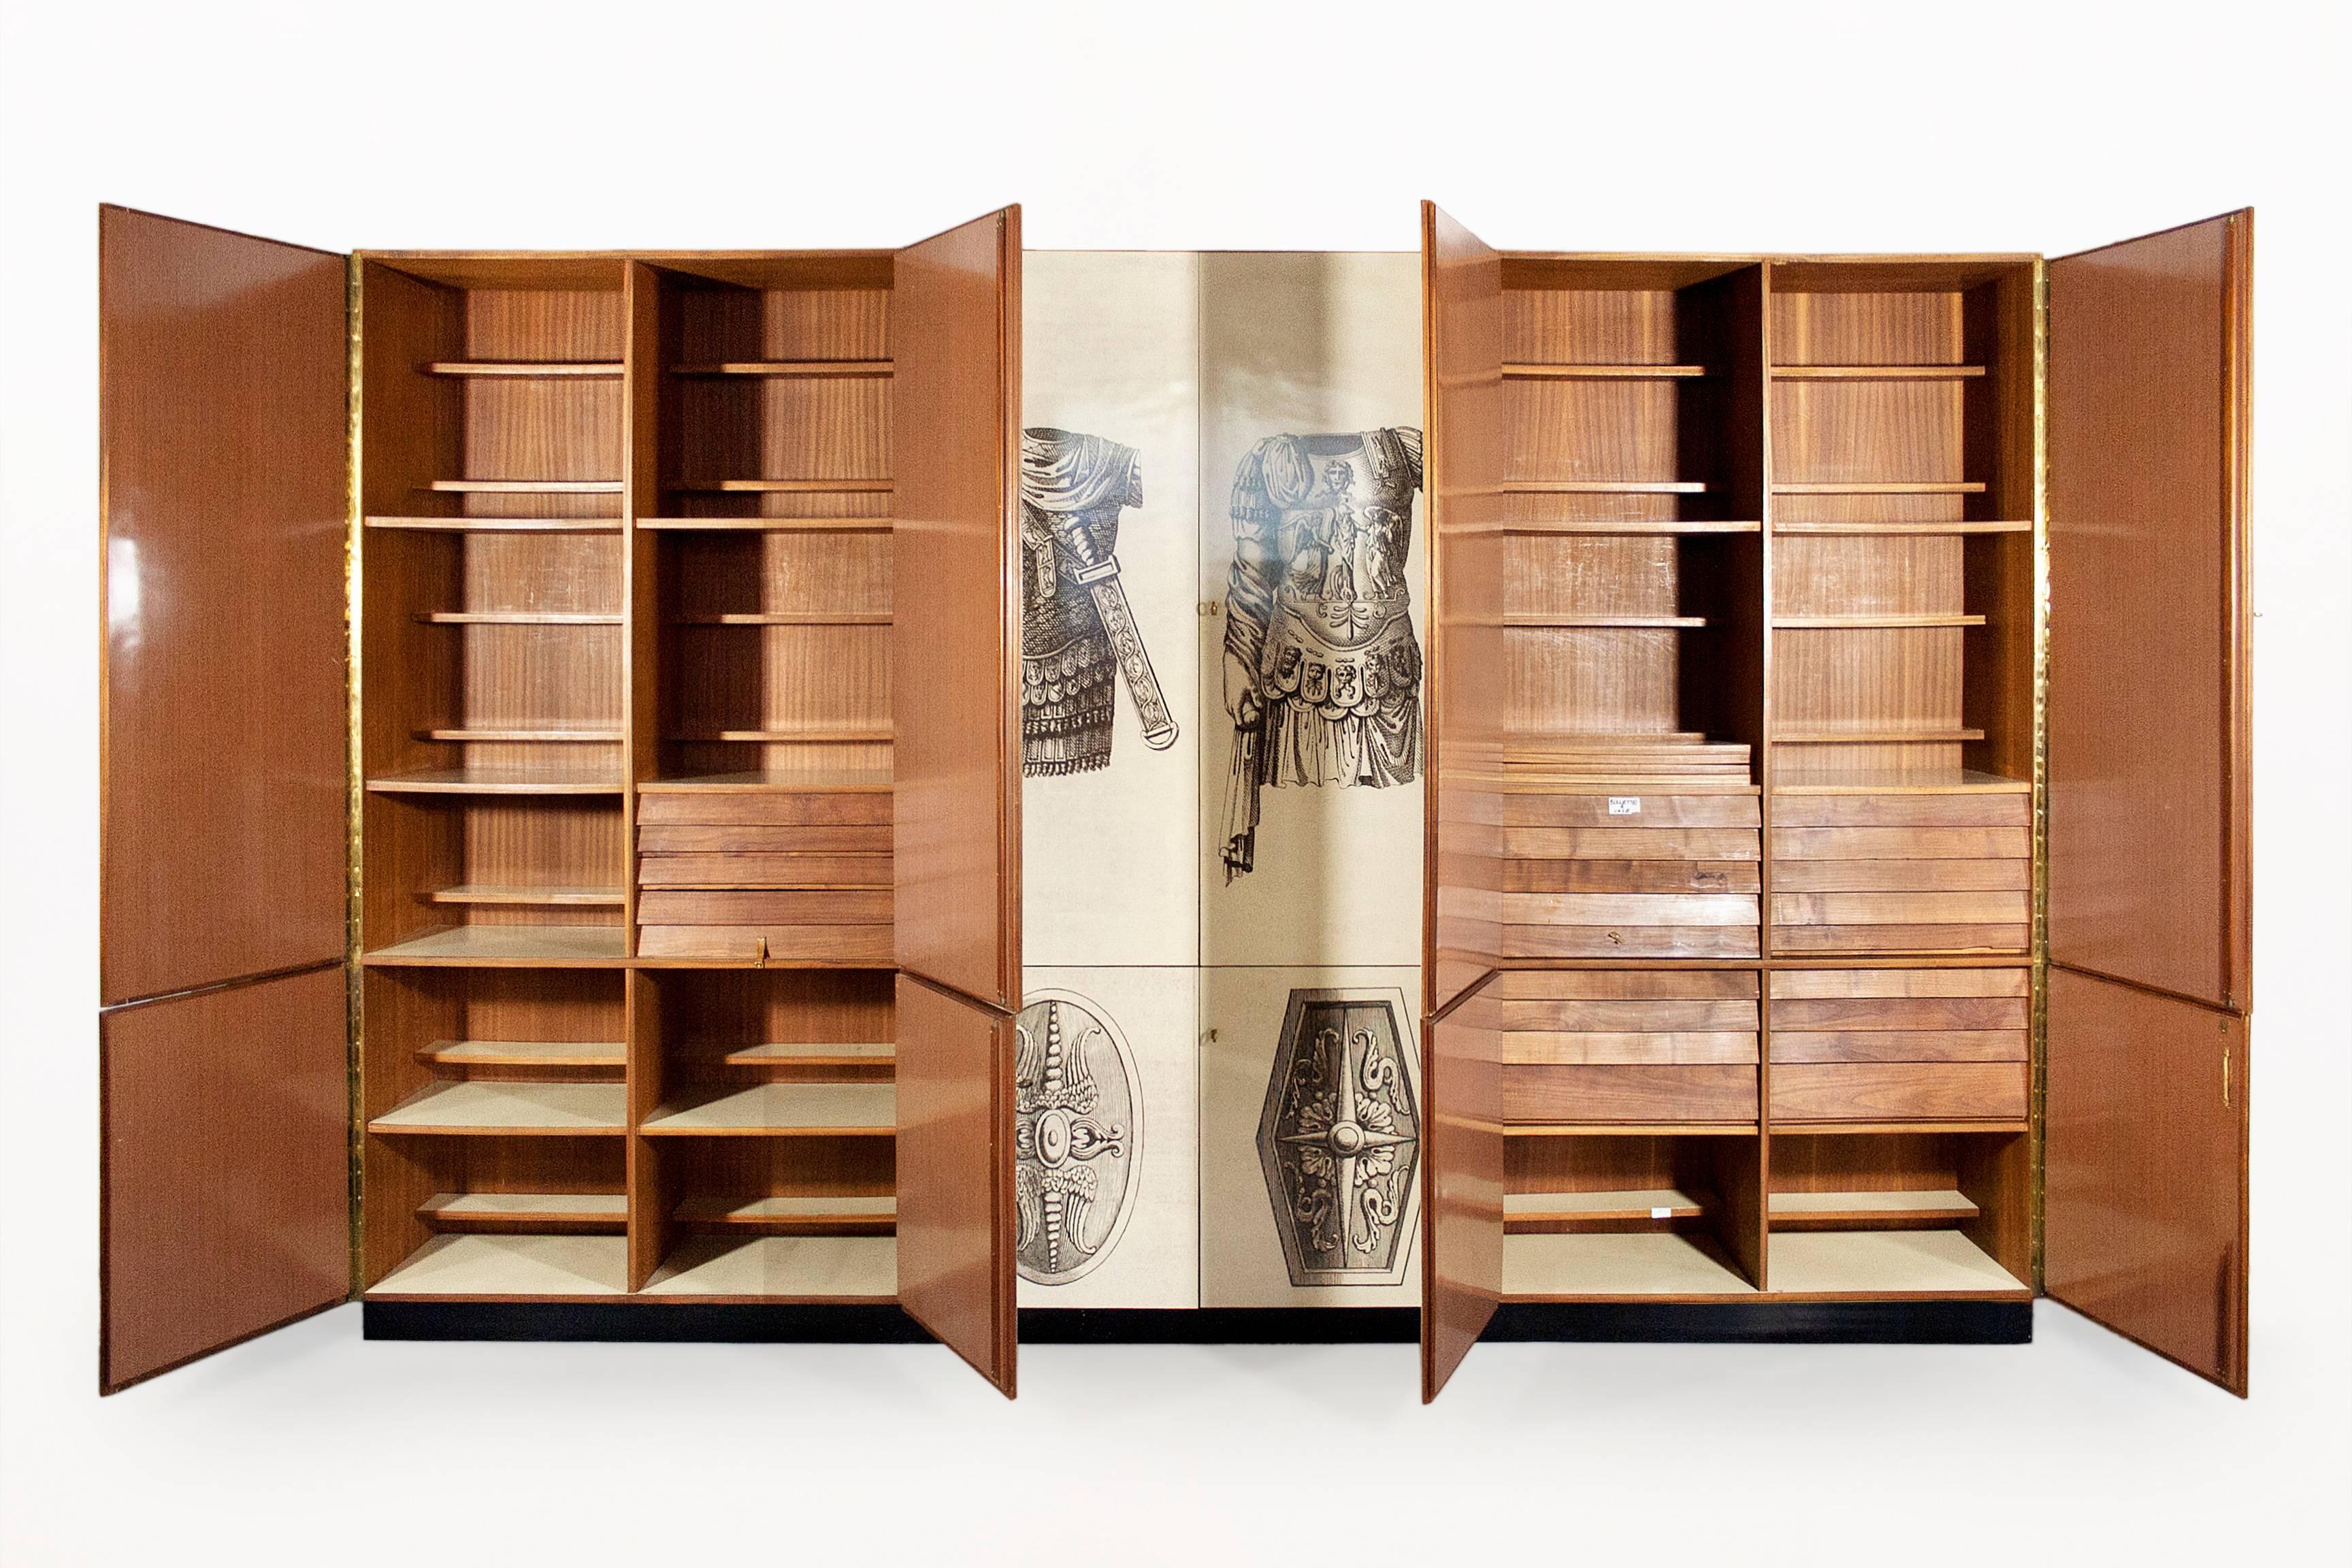 Important neoclassical cabinet with armory motifs.
In the style of Fornasetti.
Interior with 25 drawers and 37 removable shelves
Provenance: From the Presidential Office of the Director of a Turino-based Formica Production Company.
circa 1970,